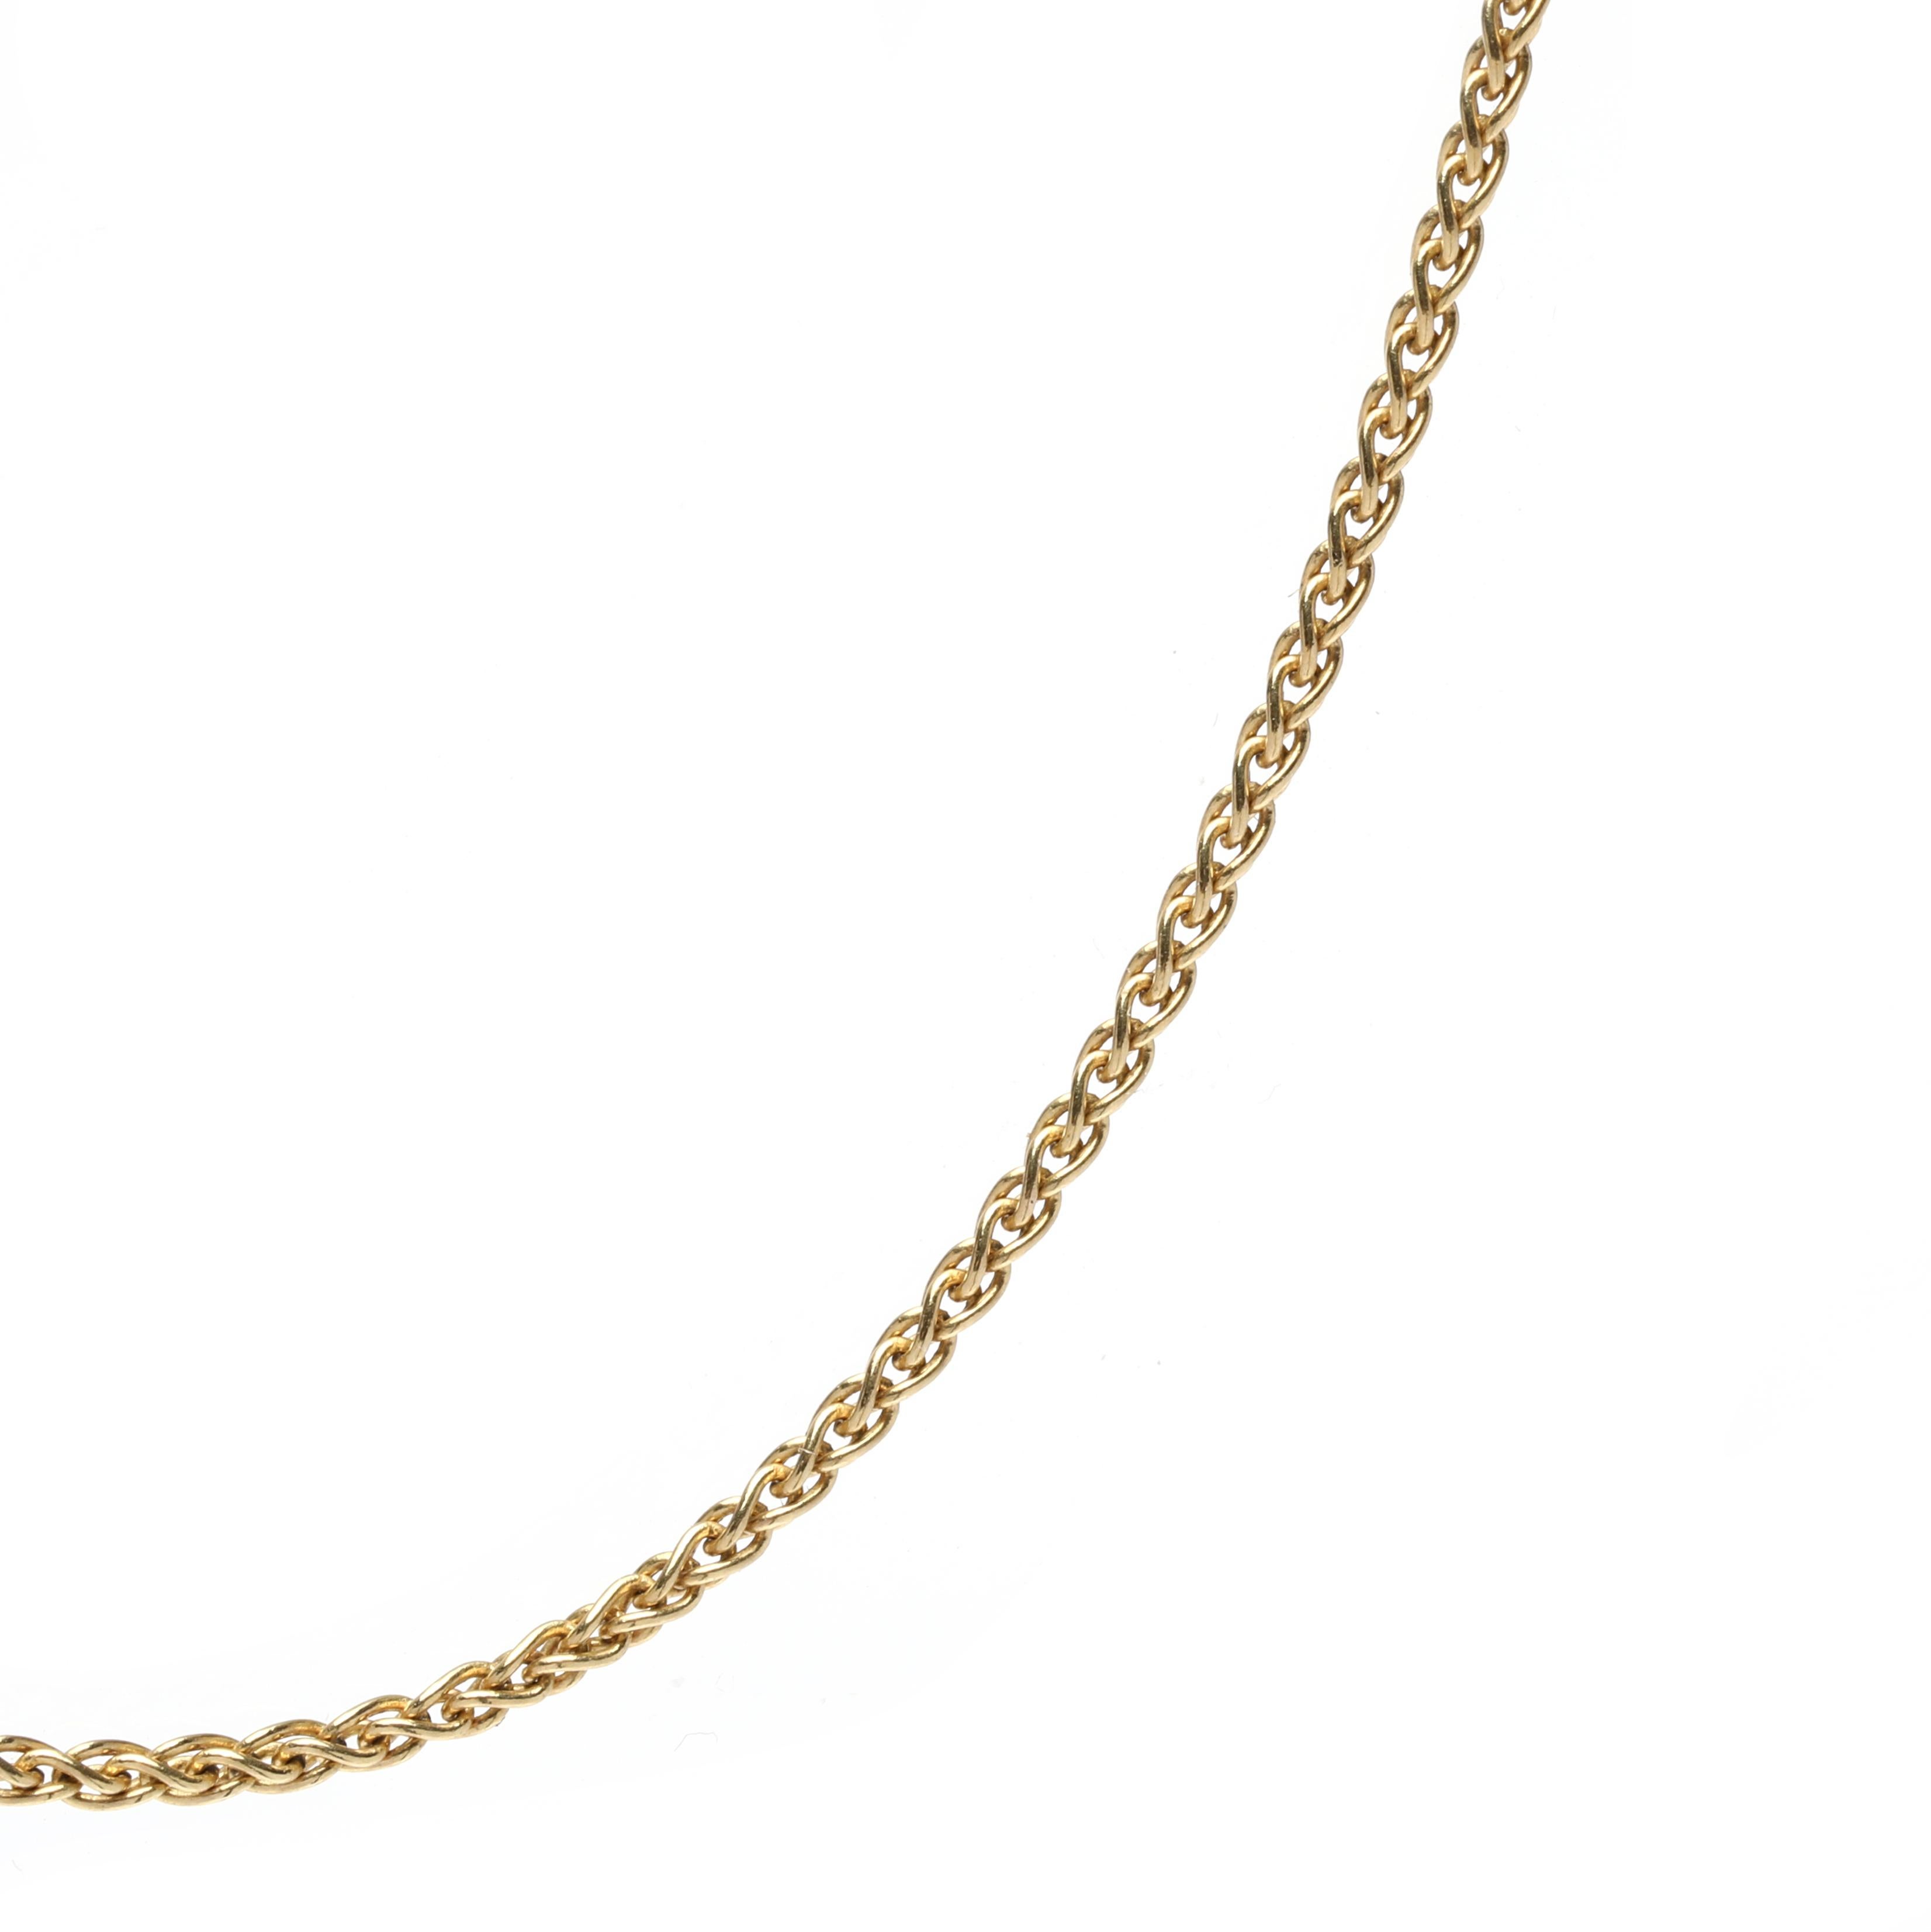 This stunning Italian Thin Wheat Chain is crafted from 14K Yellow Gold and measures 16.25 inches in length. Perfect for everyday wear, this delicate chain features a thin pendant design that is a great option for layering or wearing alone. This